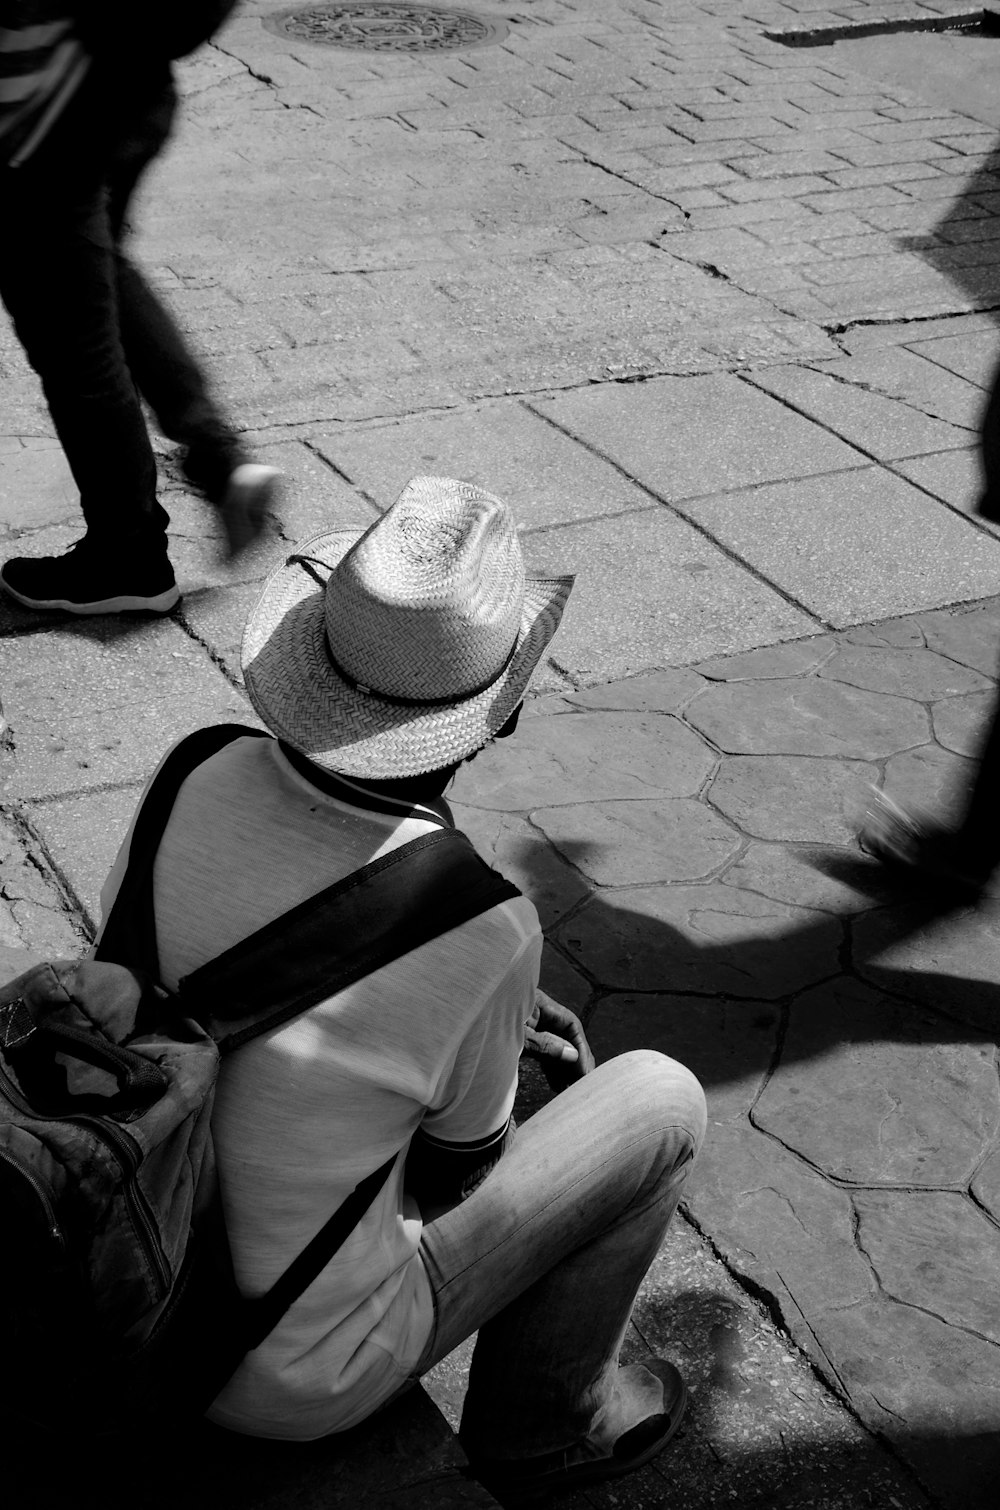 grayscale photo of person wearing cowboy hat